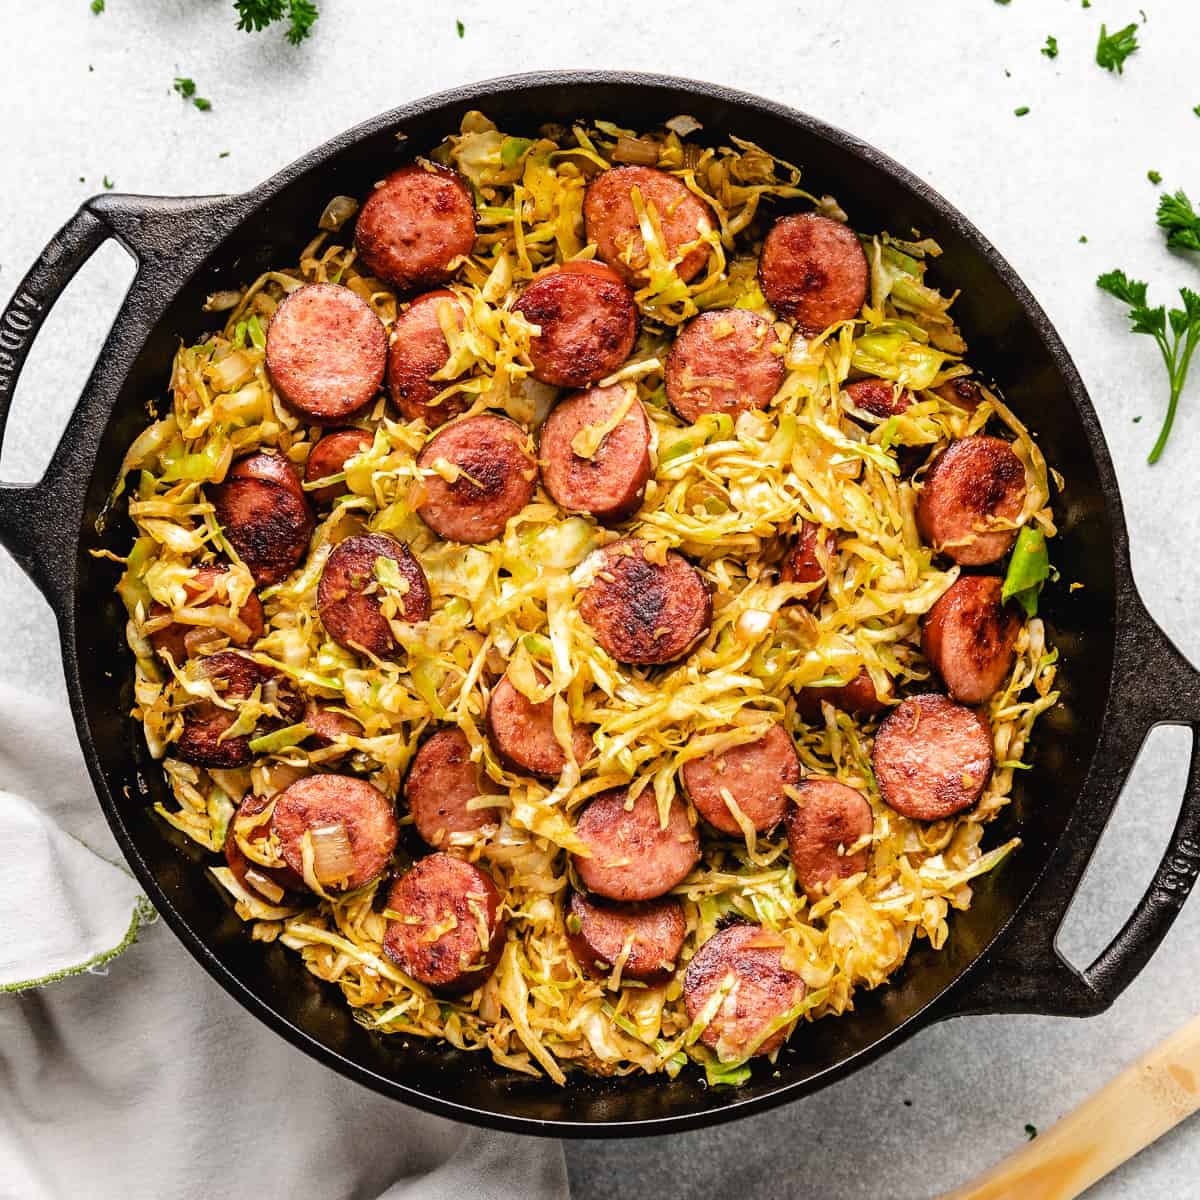 Fried cabbage with sausage